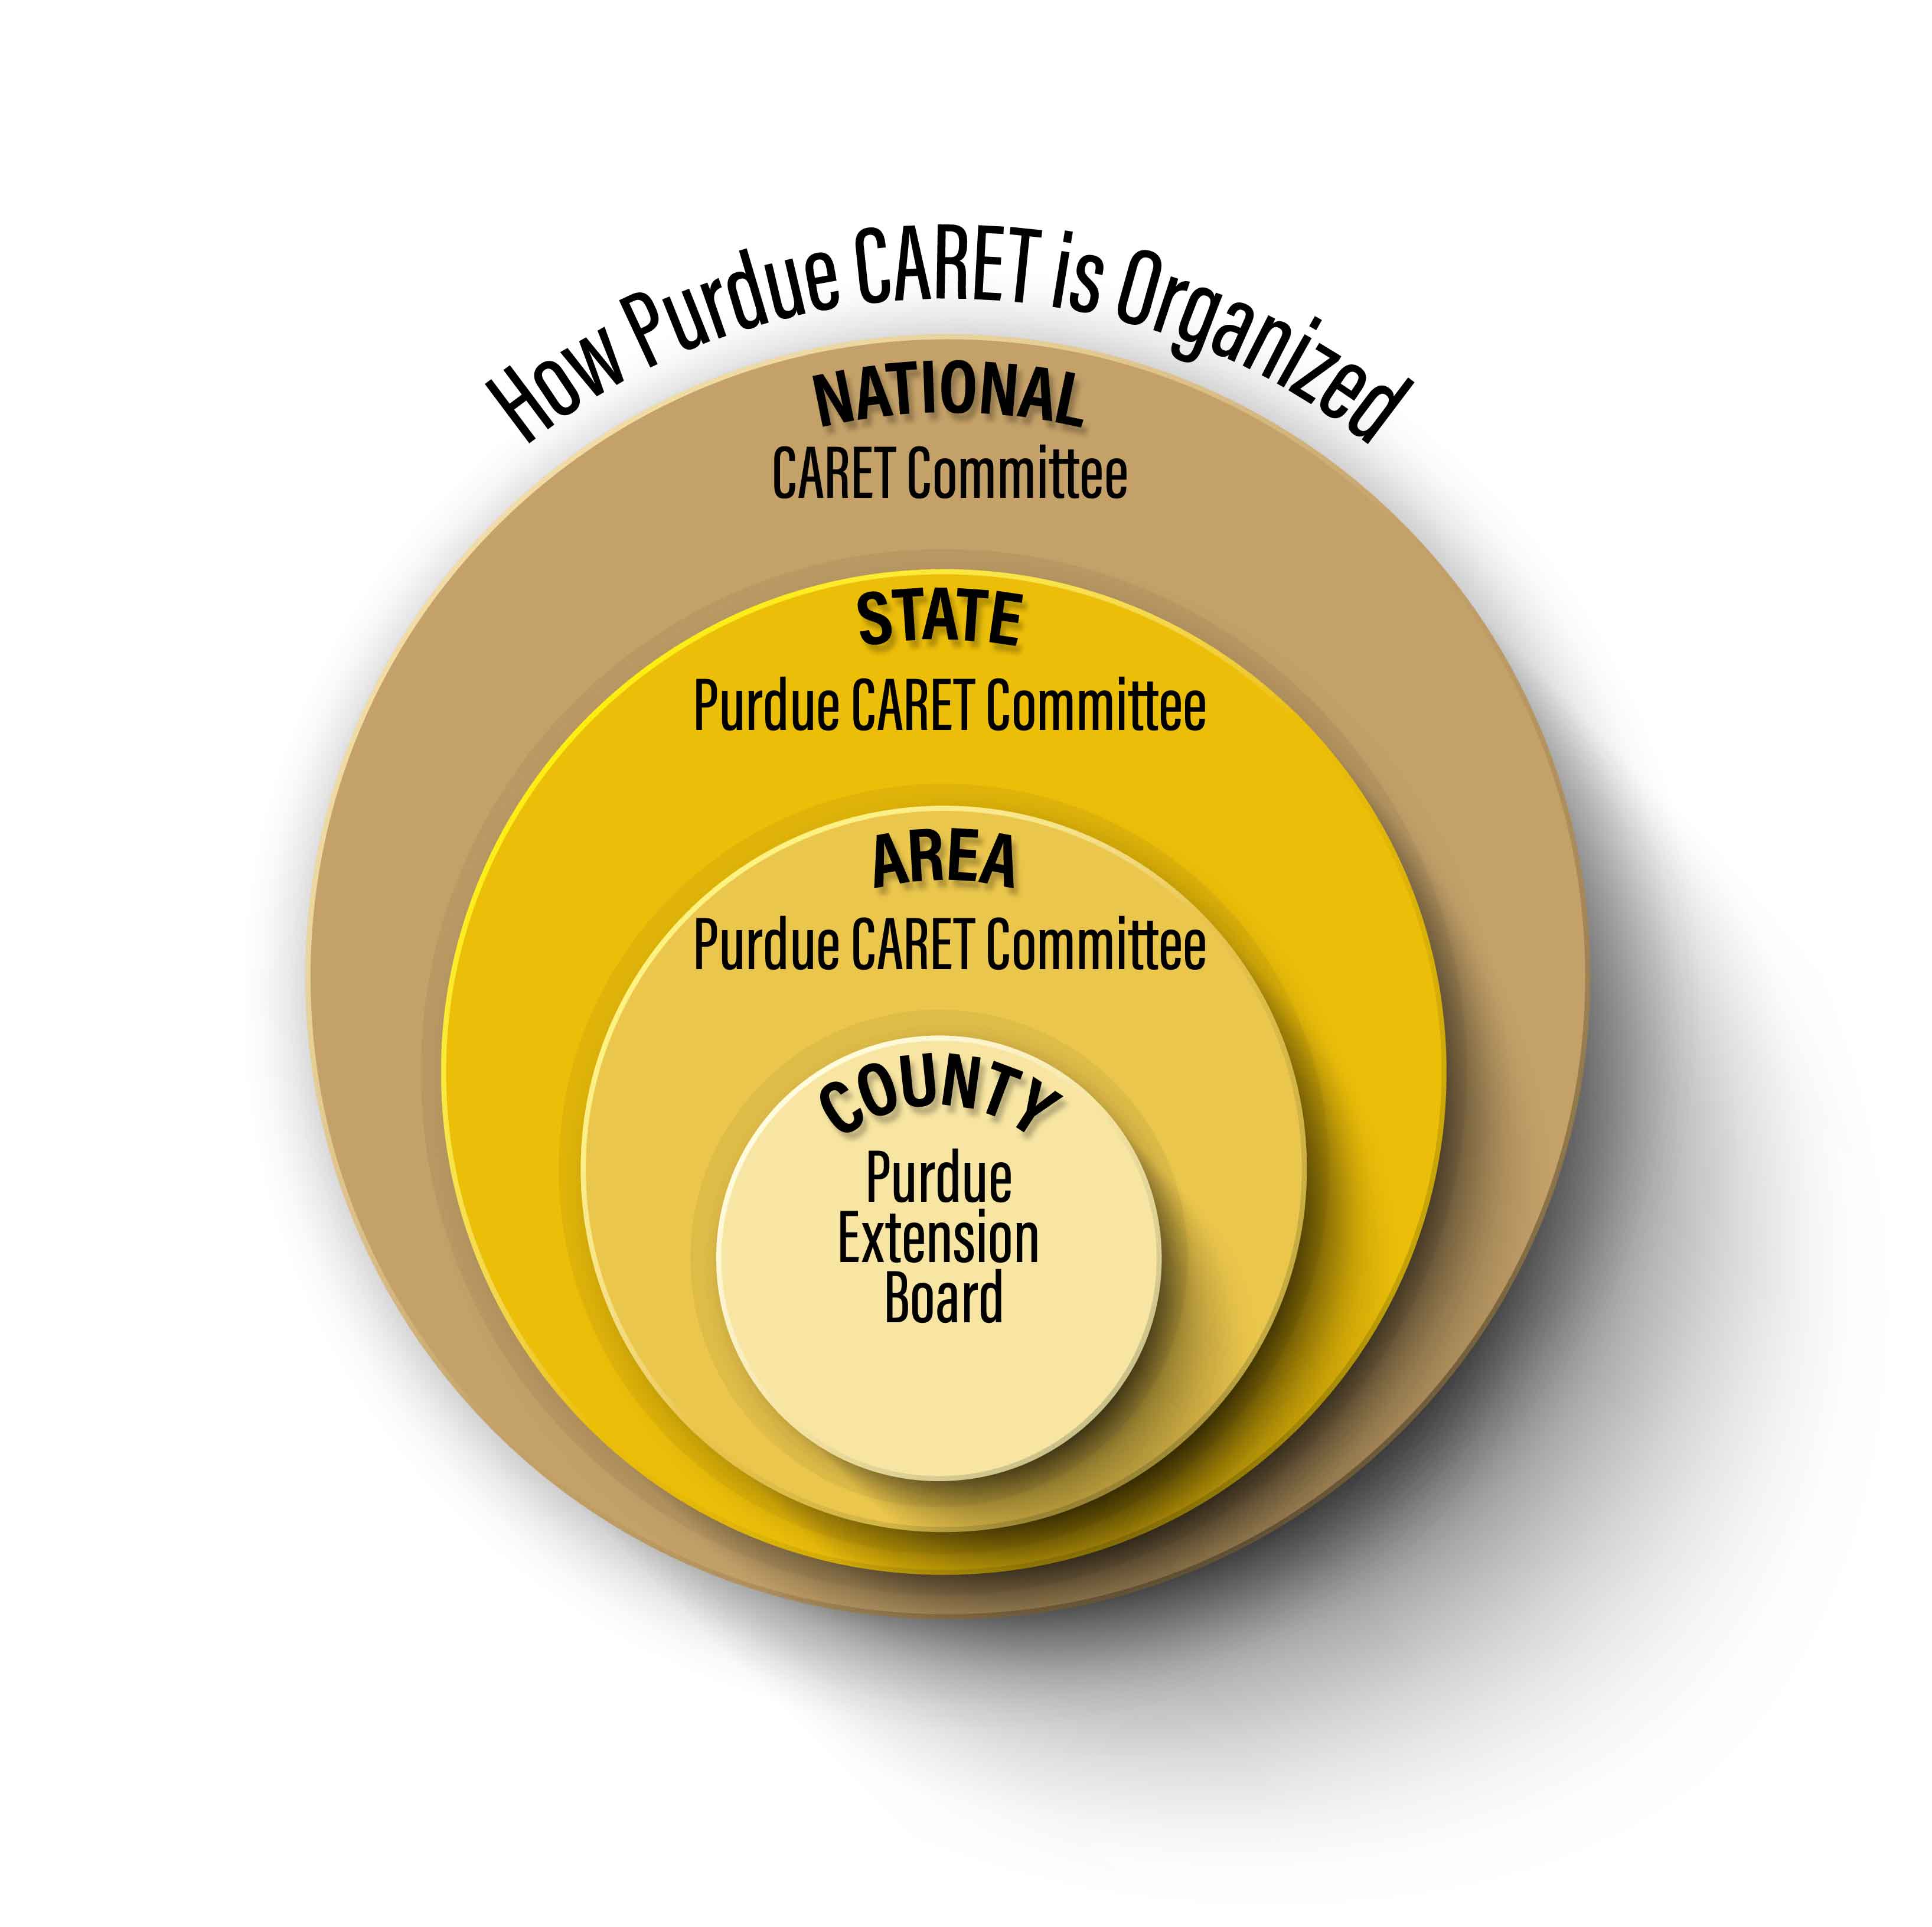 Purdue CARET is organized by National, State, Area, and County